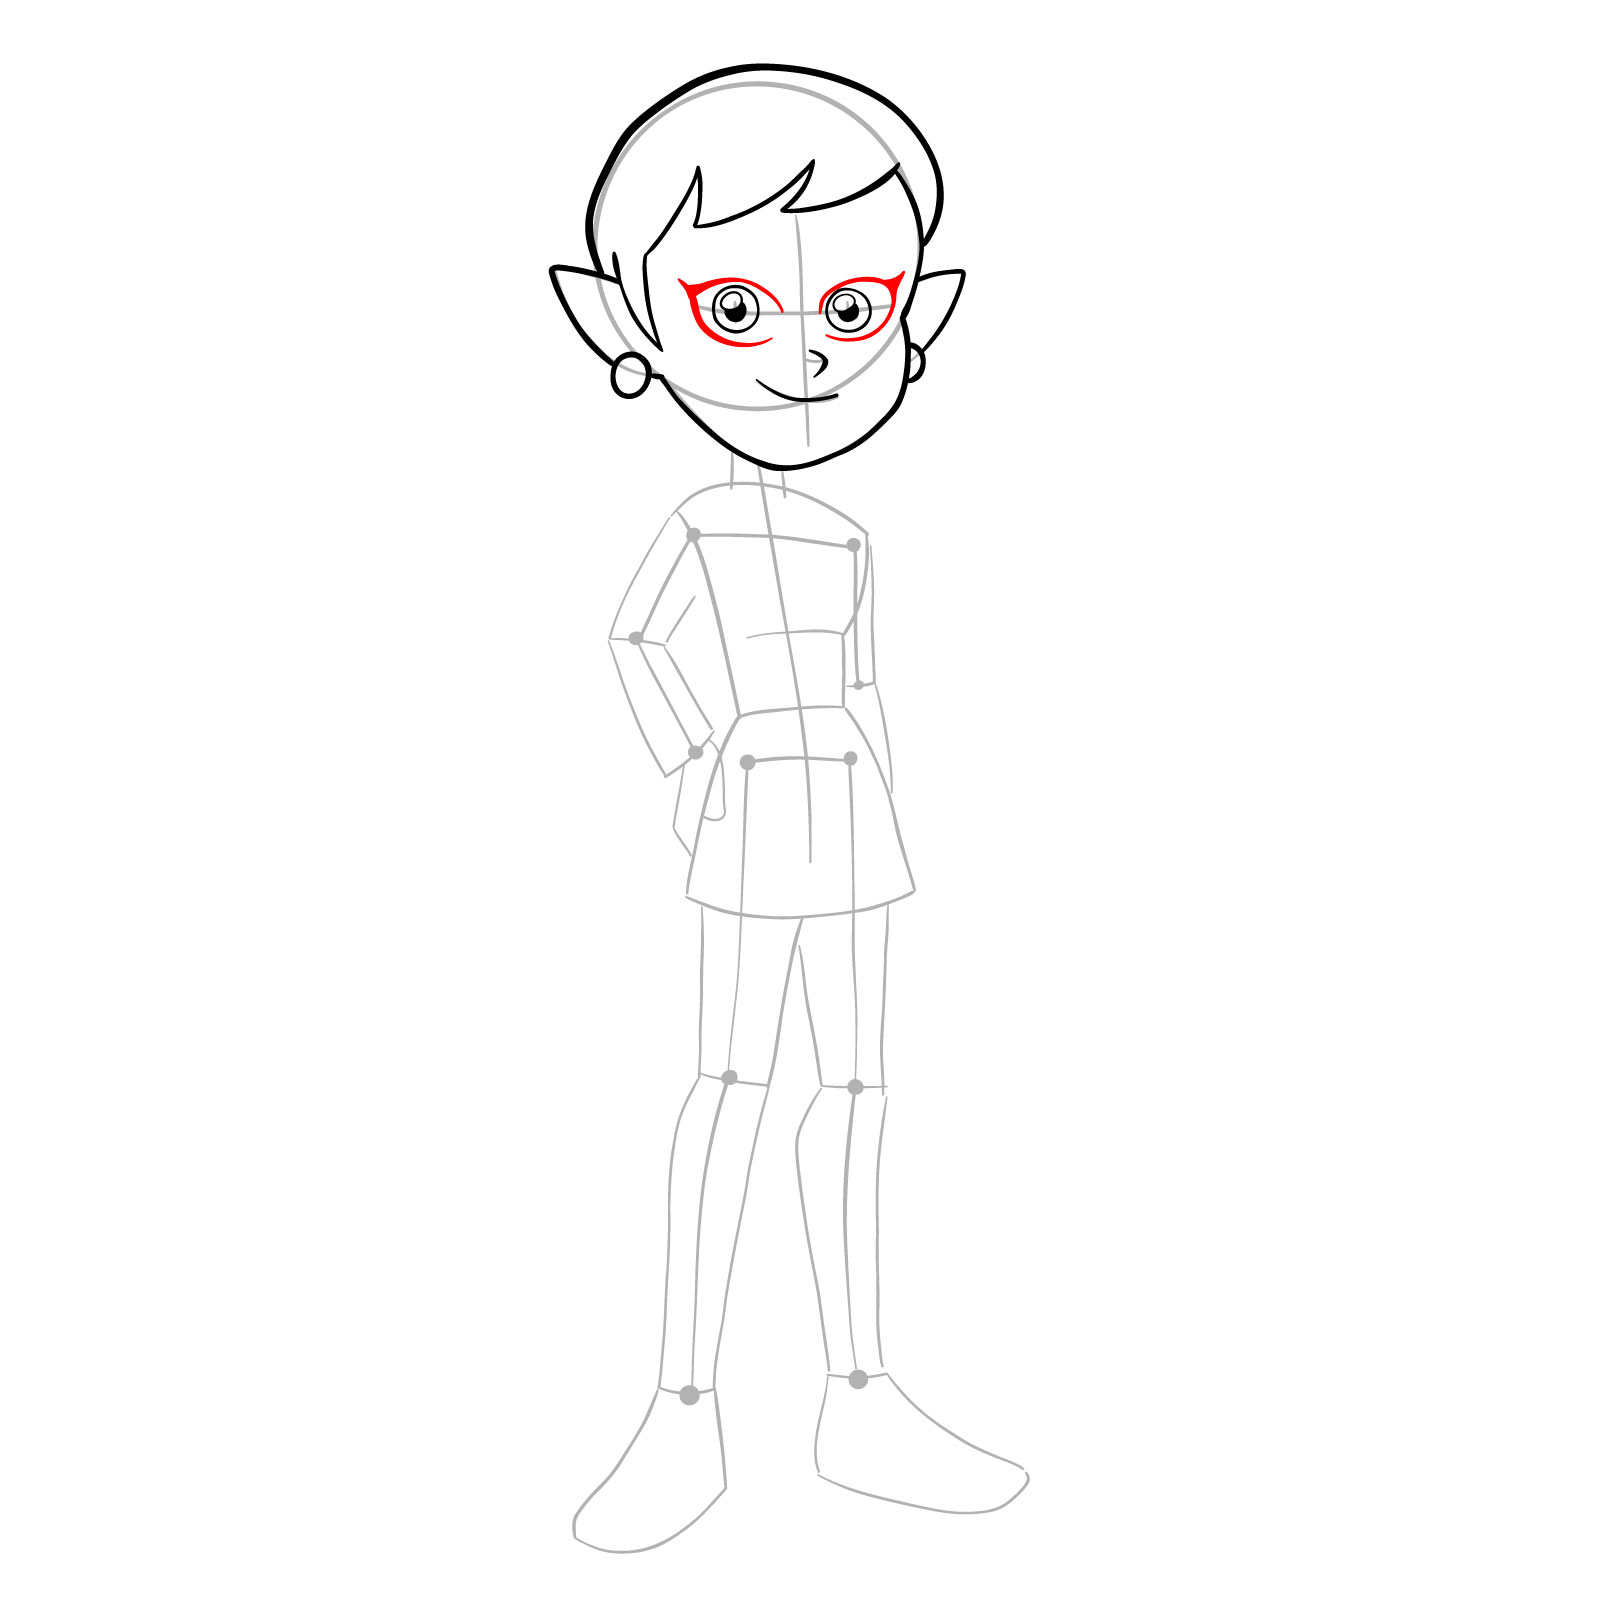 How to draw Emira Blight from The Owl House - step 11